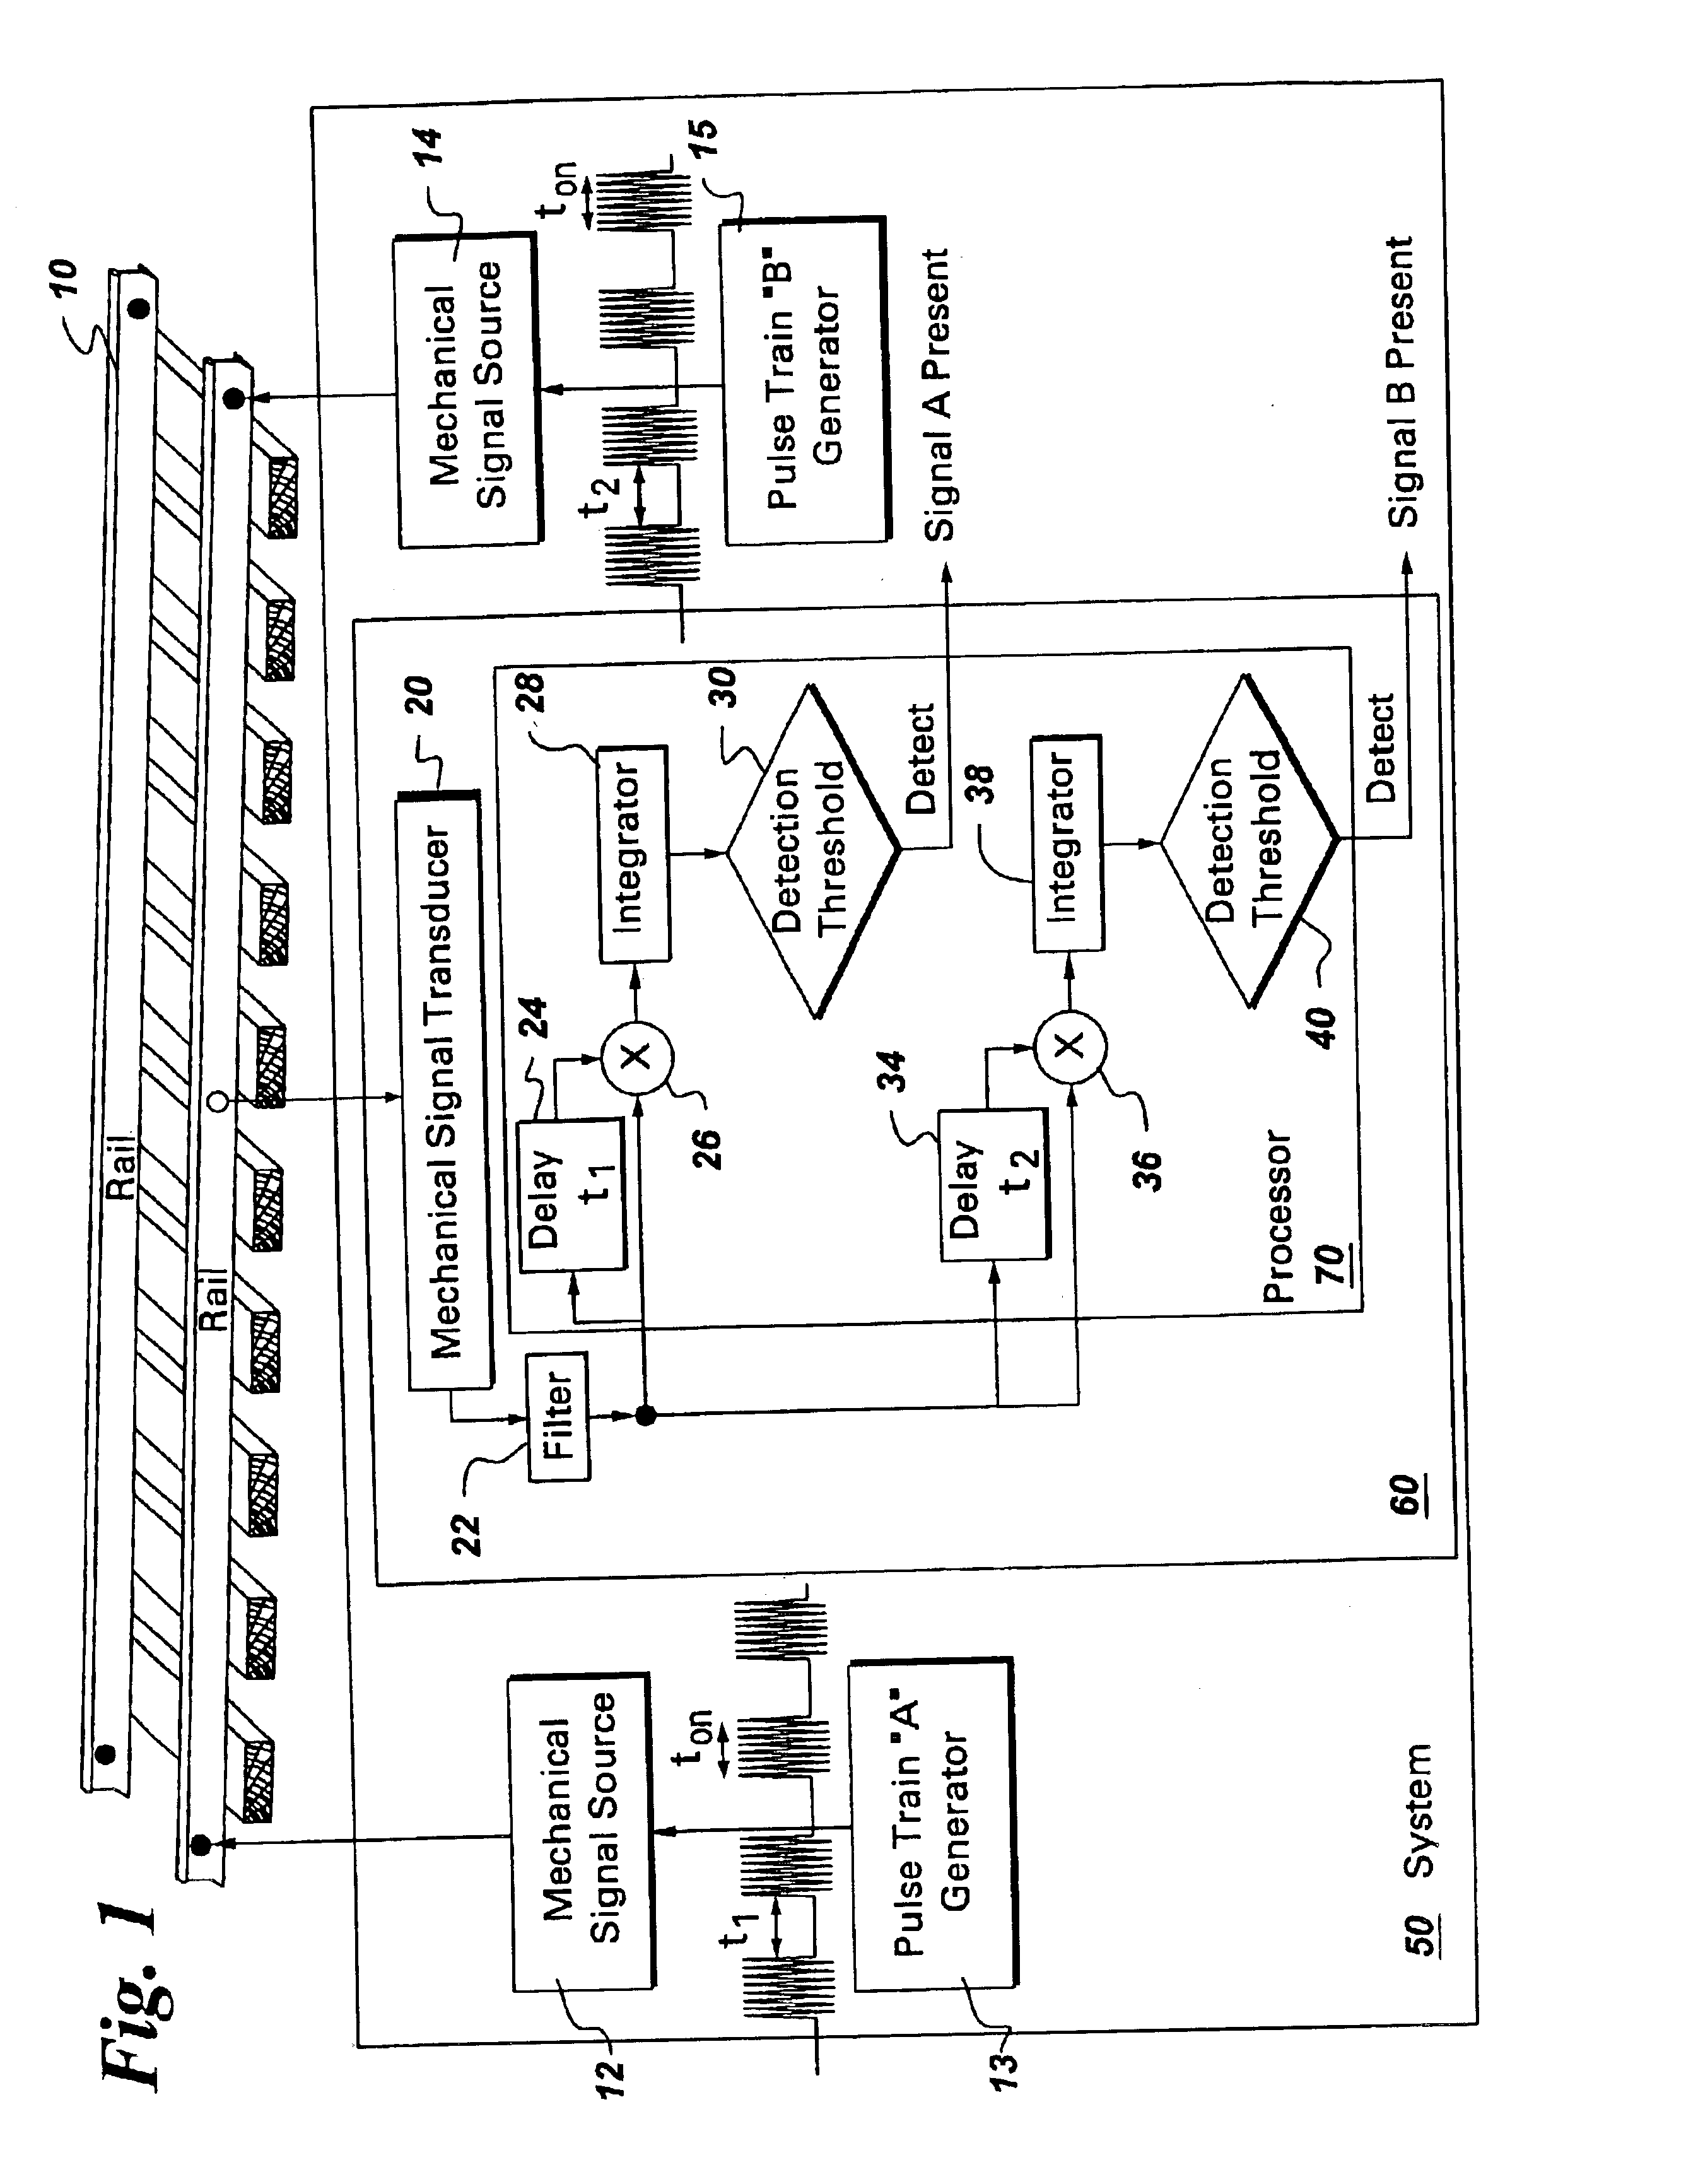 Active broken rail detection system and method